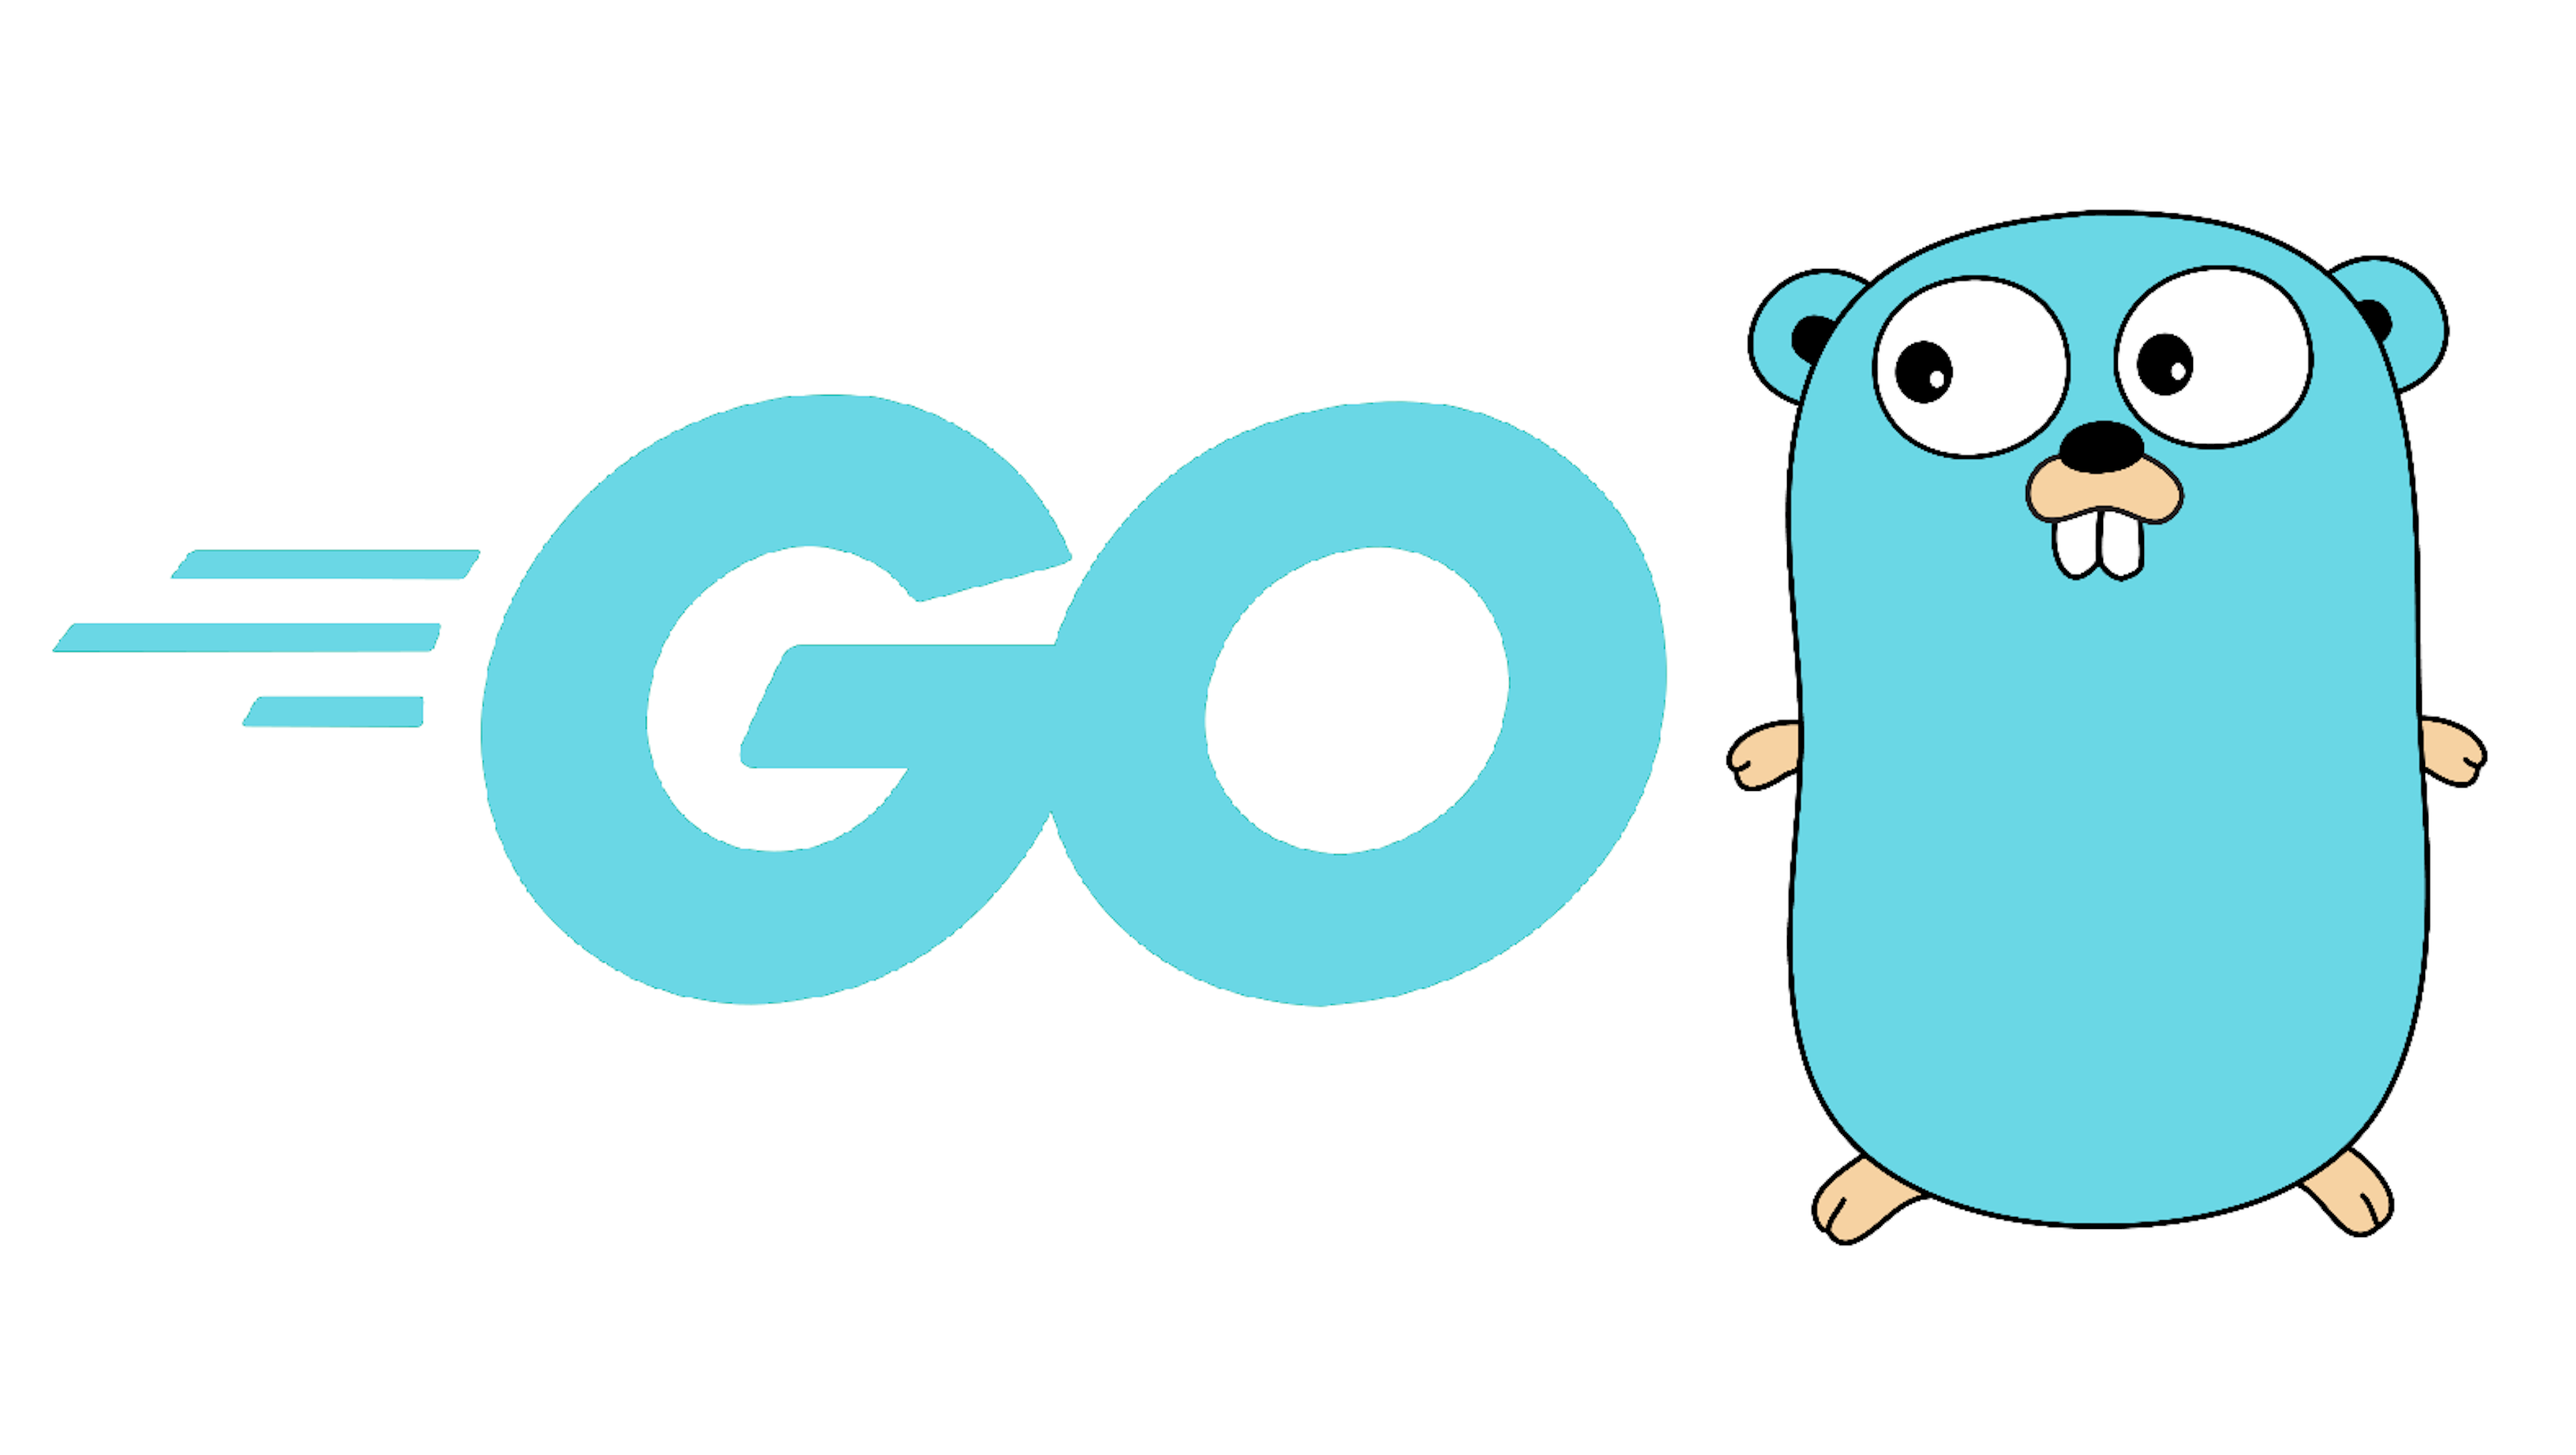 Writing a Resilient and Scalable RESTful API in Go [Part 1]